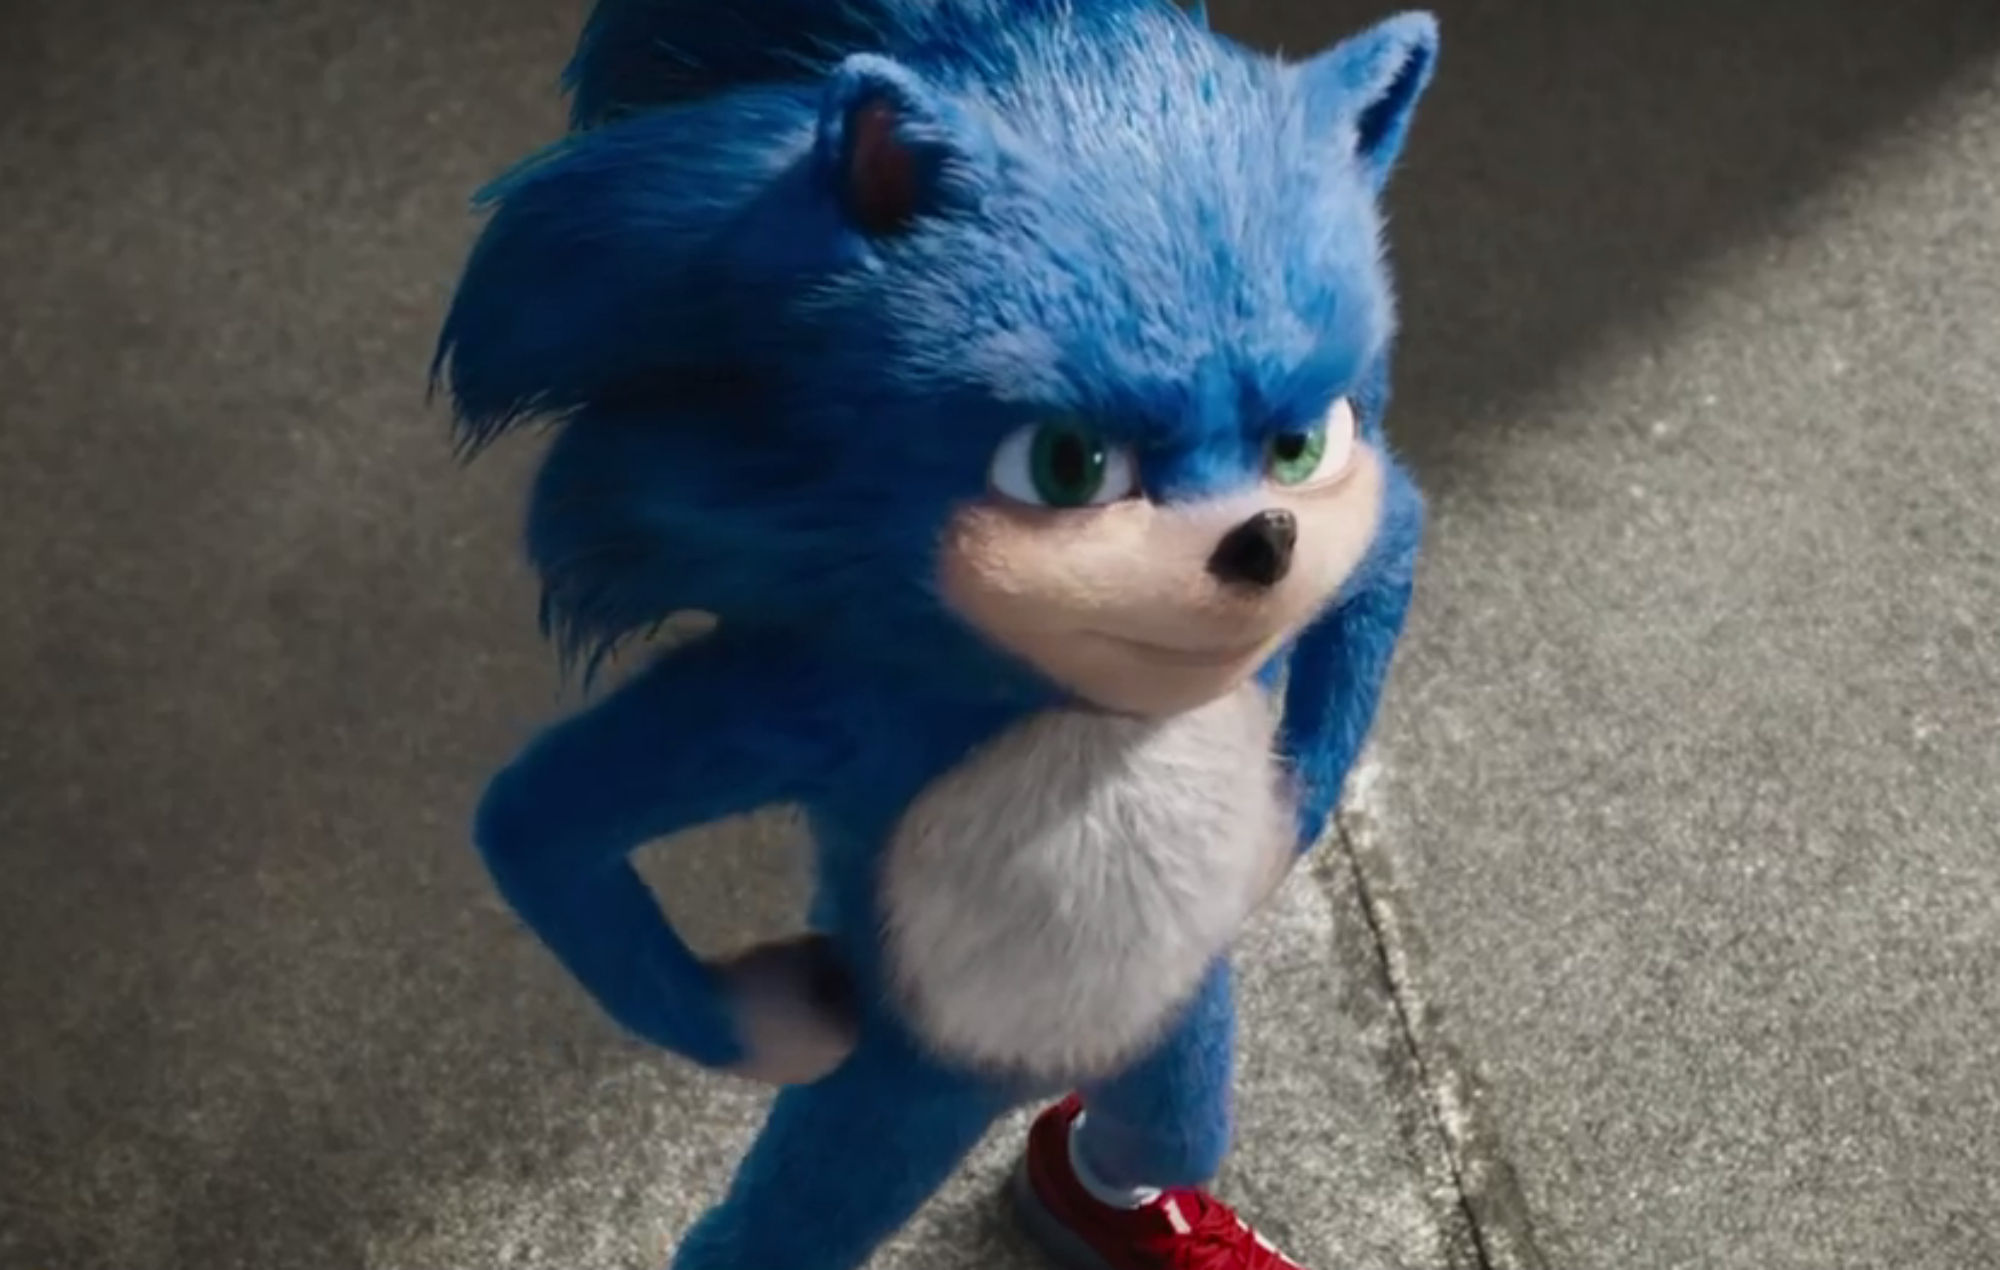 Sonic The Hedgehog Movie to get a visual overhaul - 9to5Toys2000 x 1270